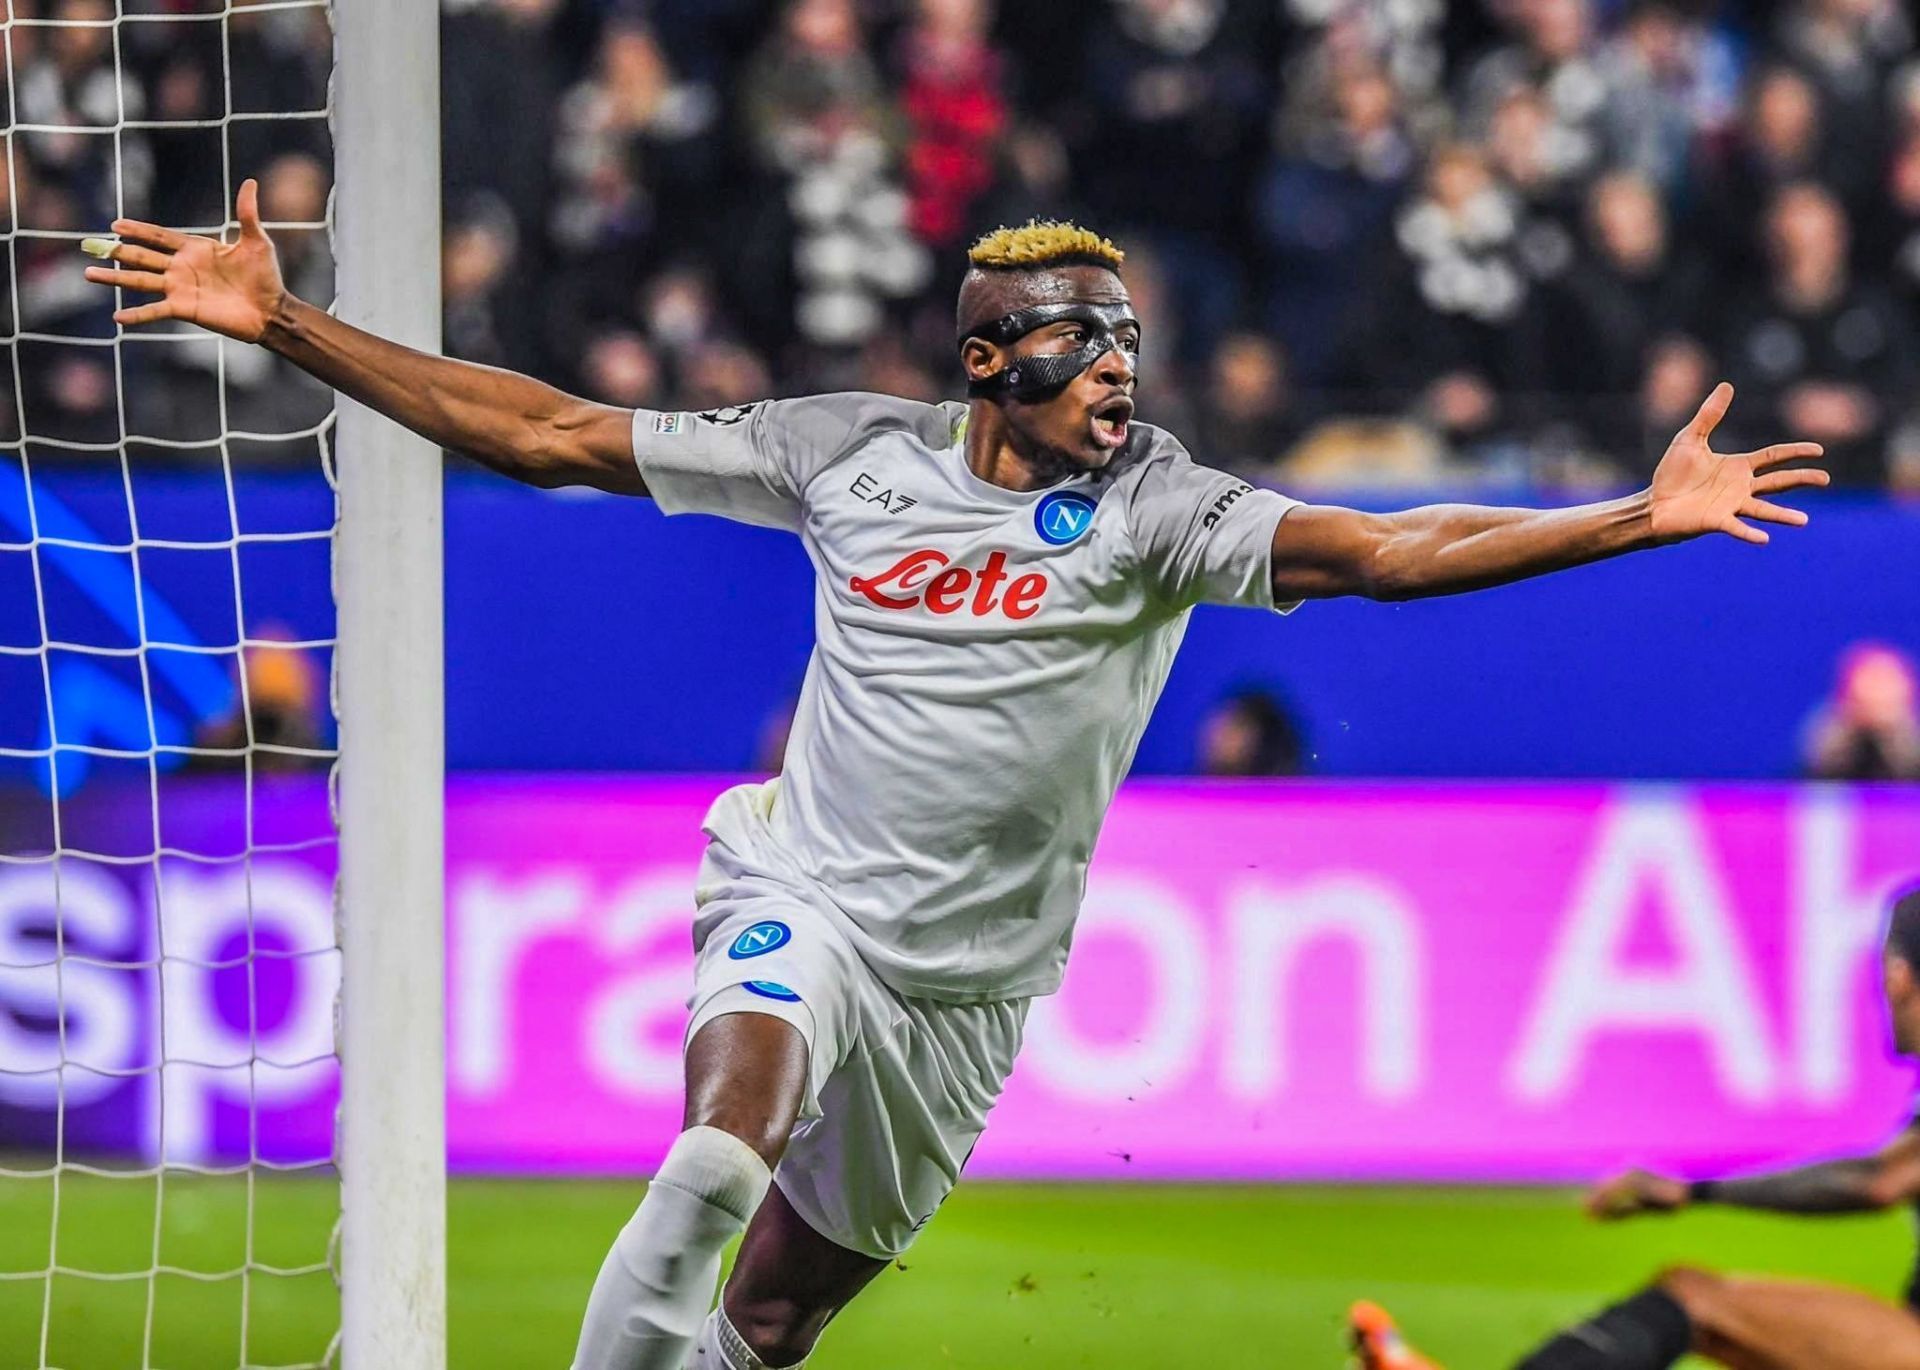 Victor Osimhen could lead Napoli to their first Scudetto title since 1990.